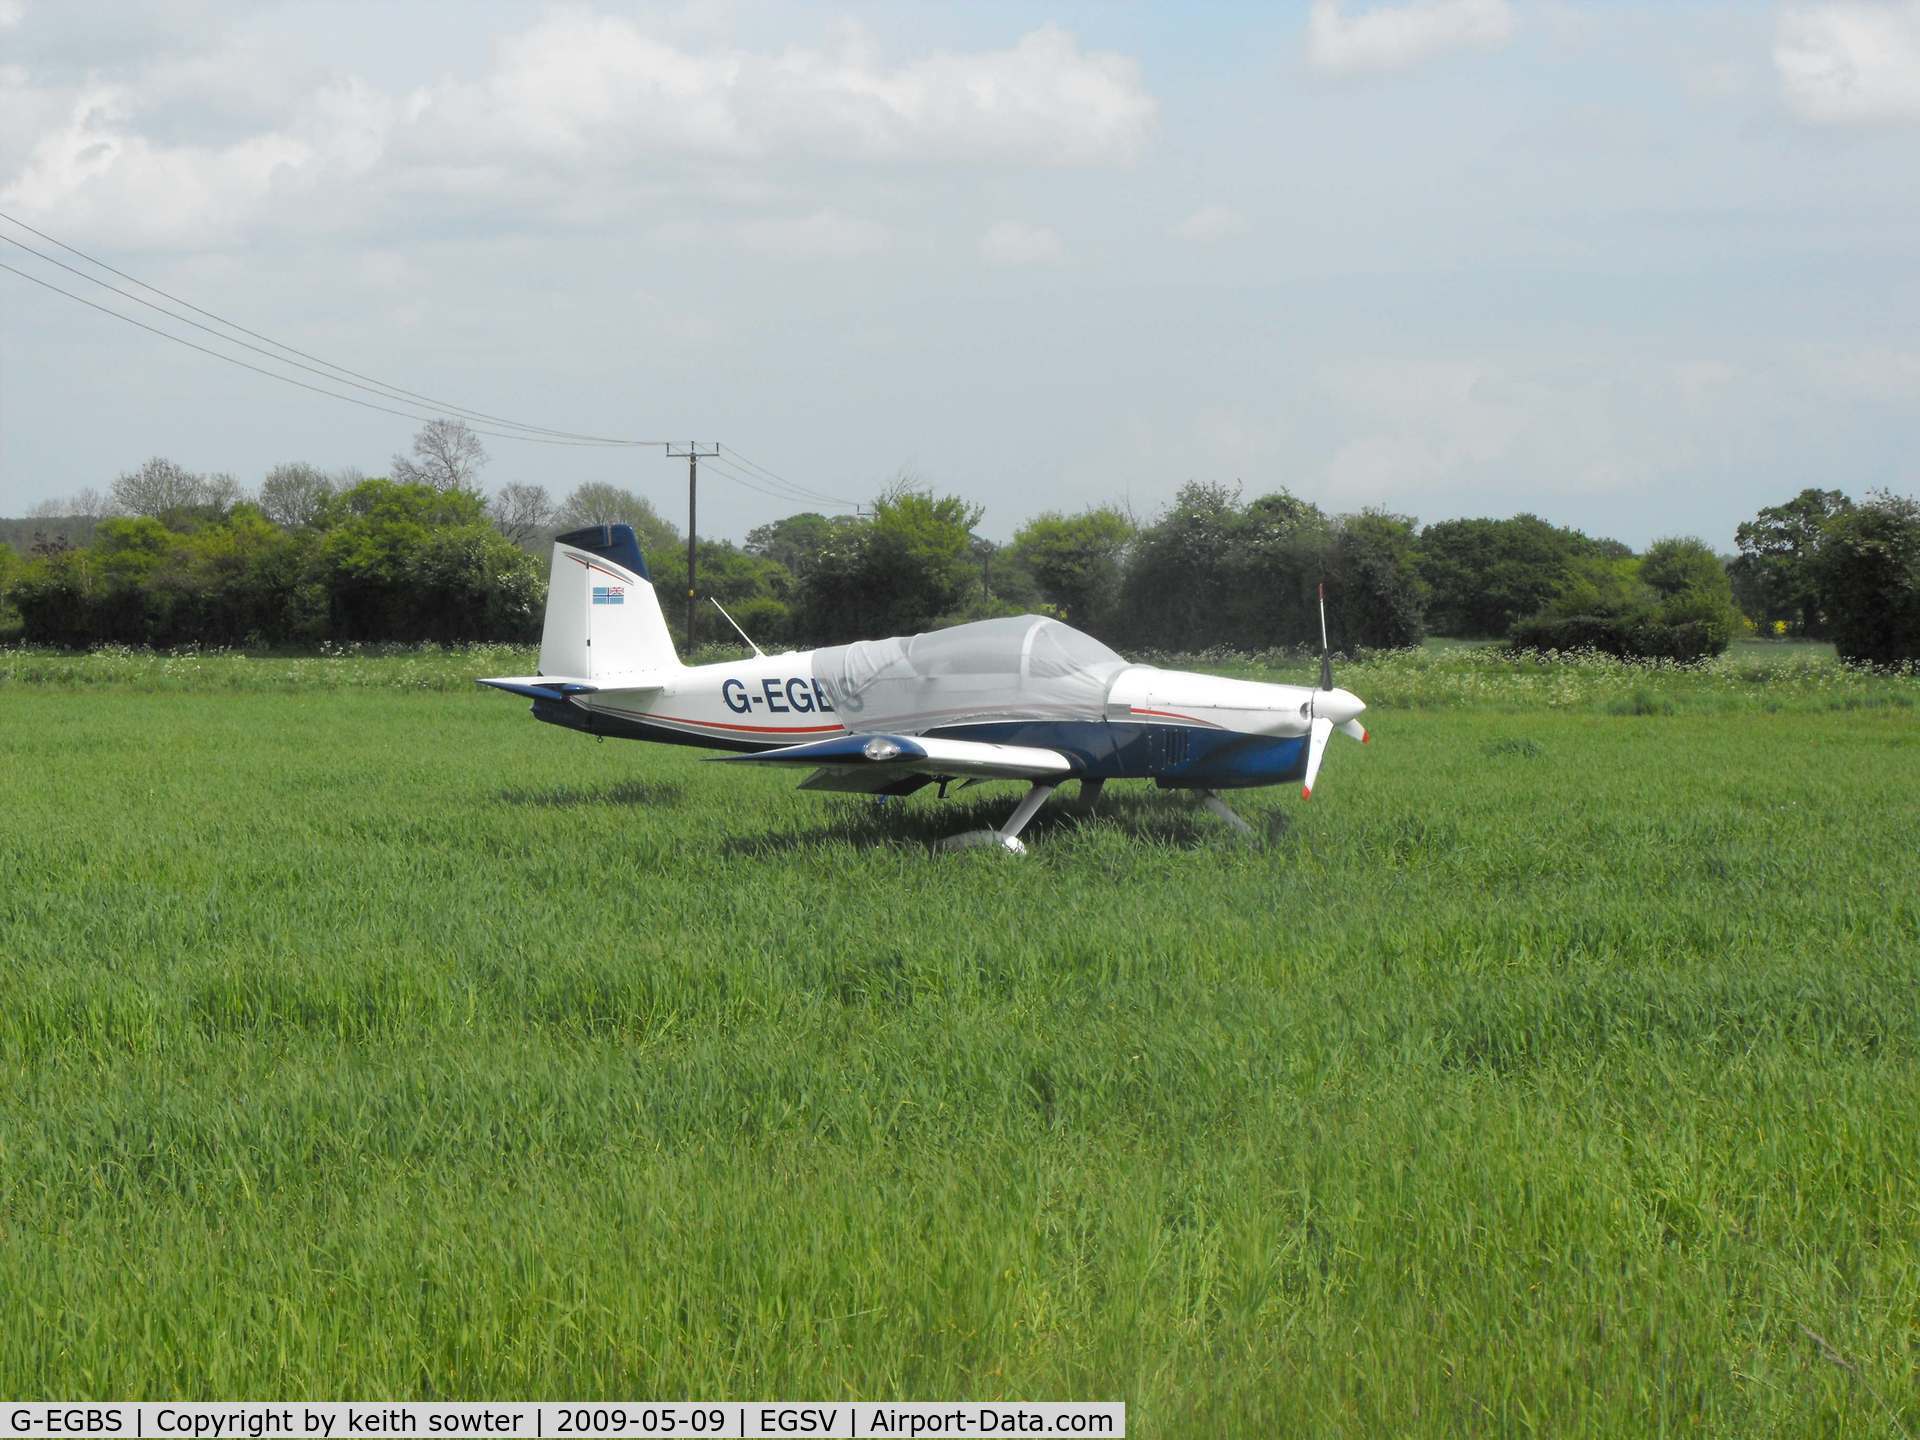 G-EGBS, 2005 Vans RV-9A C/N PFA 320-14234, Suufered engie failure in flight whilst on base leg to land - landed in cornfield - all OK